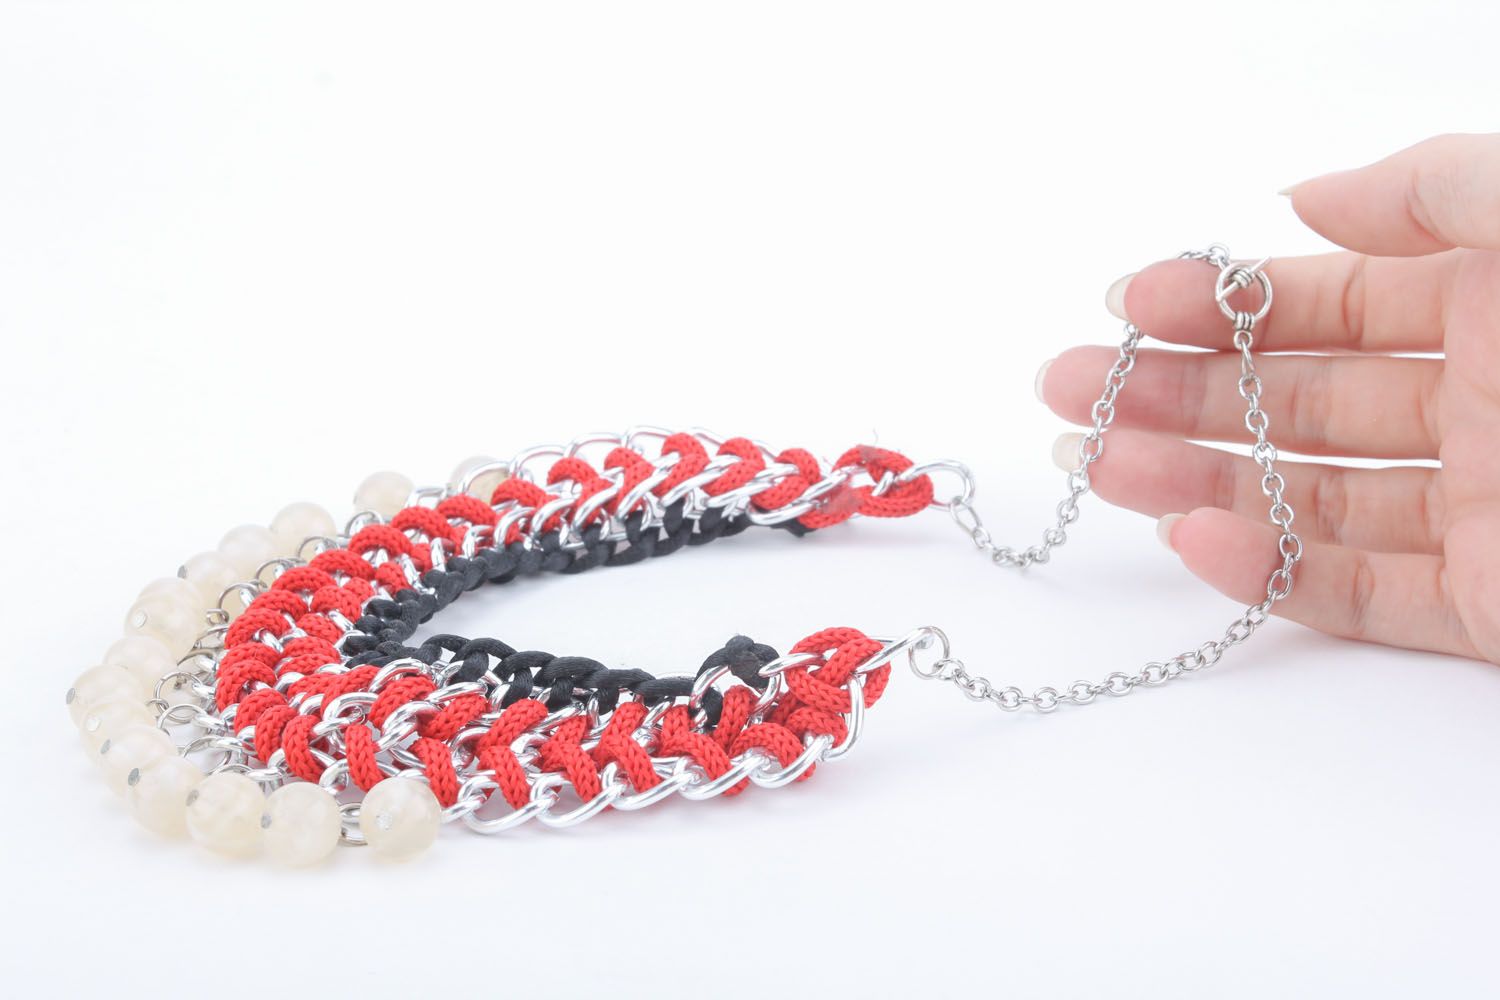 Handmade necklace made of metal and cords photo 5